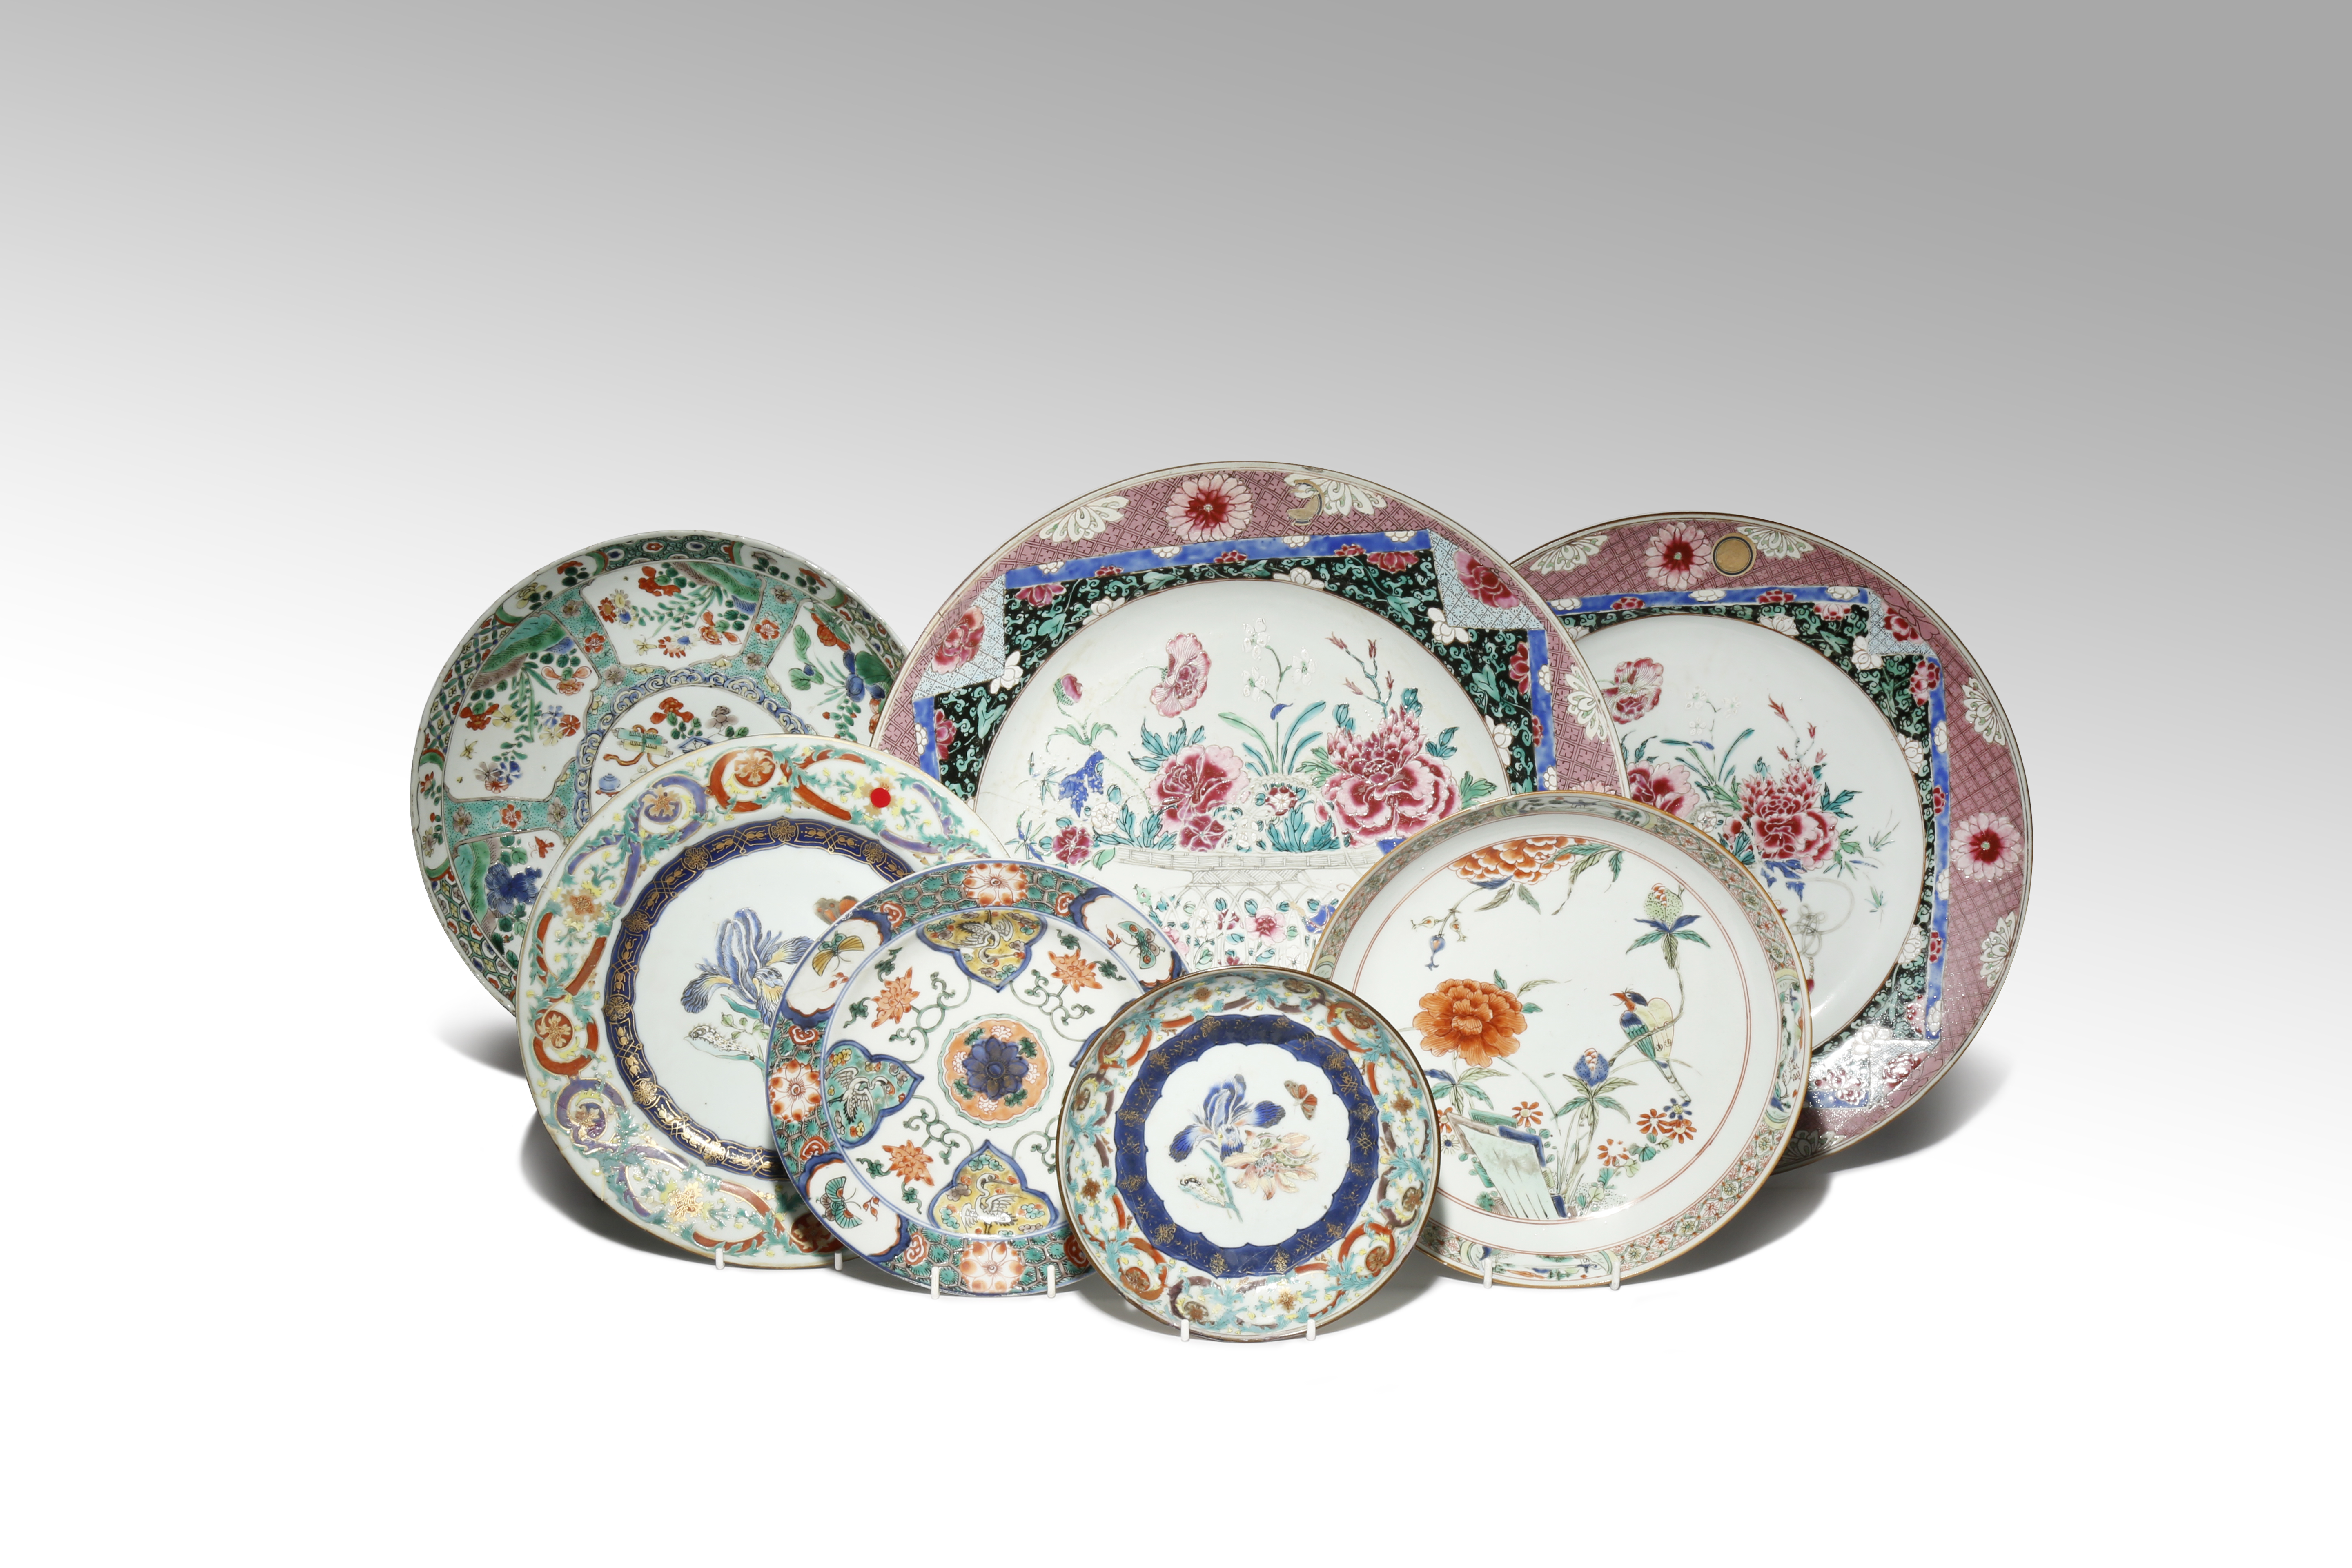 SEVEN CHINESE ENAMELLED PORCELAIN PLATES 18TH CENTURY Comprising: two large famille rose plates